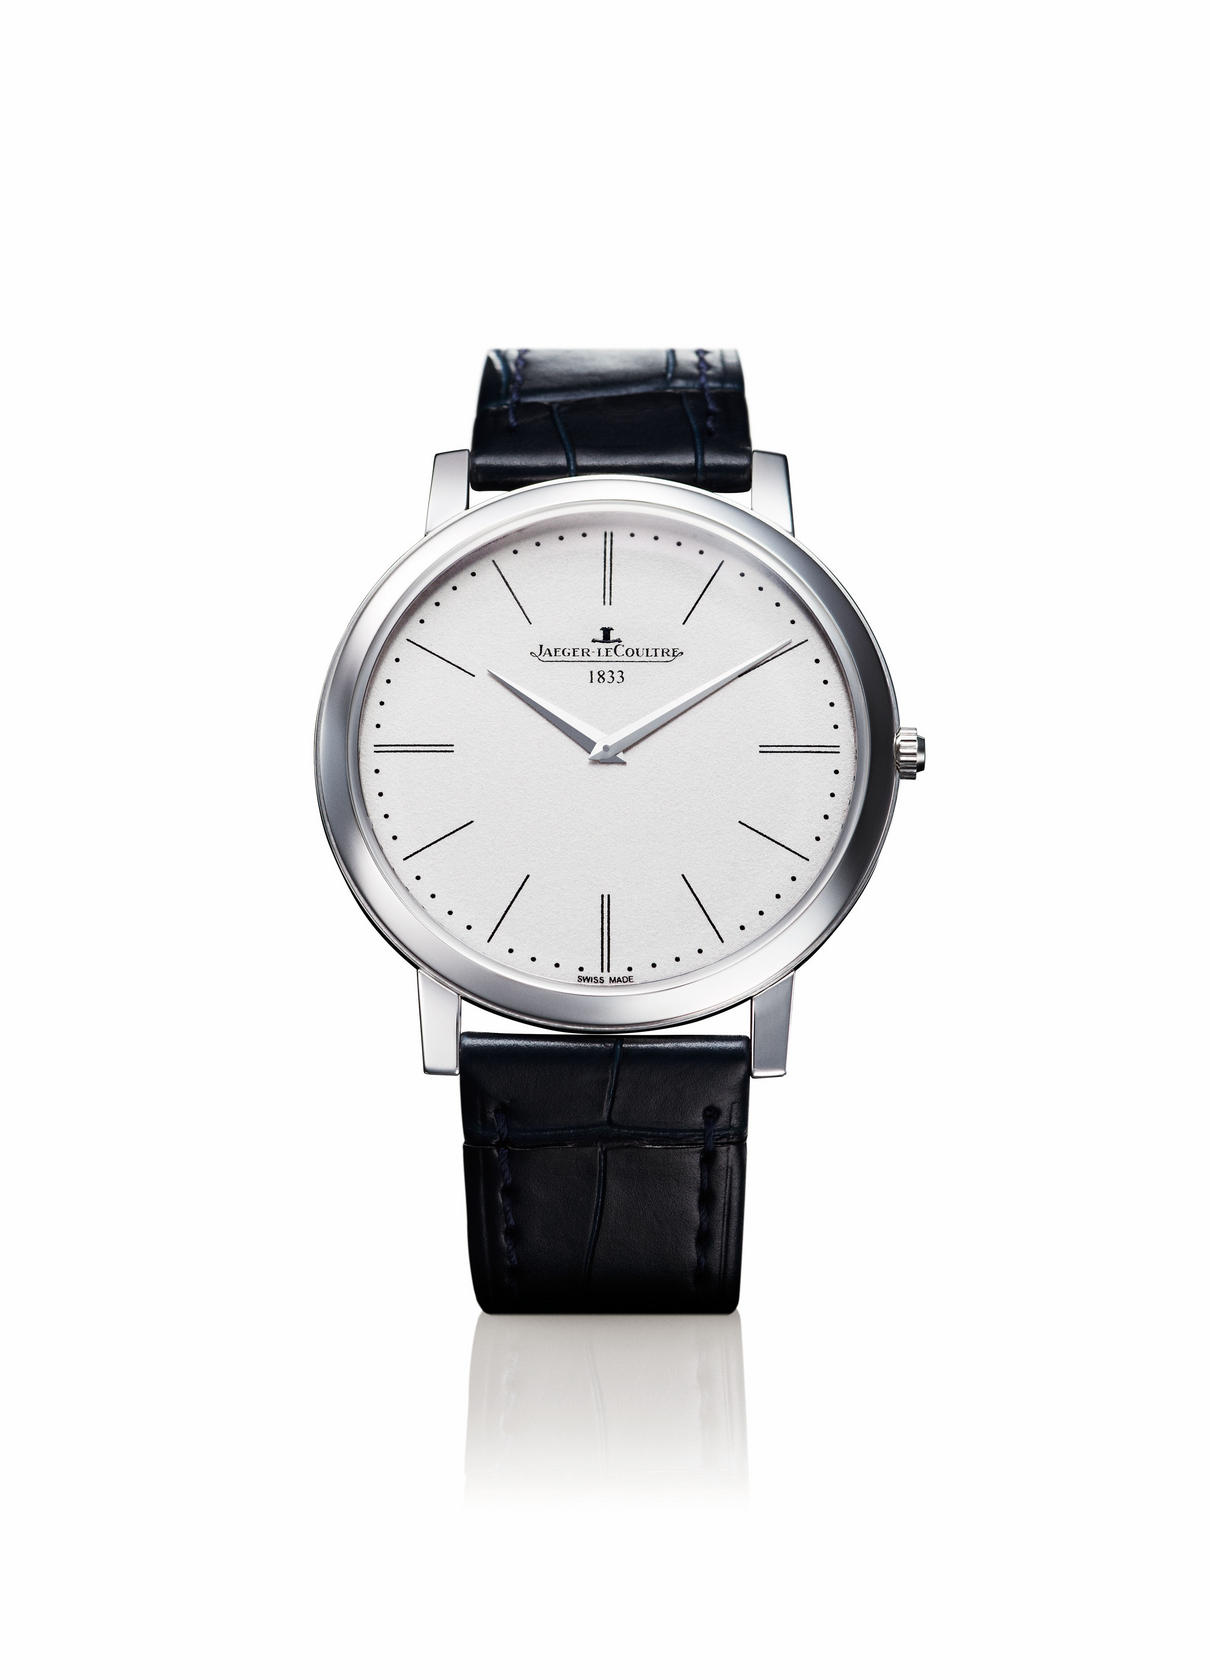 JAEGER-LECOULTRE Master Ultra Thin Jubilee: Inspired by an ultrathin pocketwatch launched by the brand in 1907, this new model has a knife-shaped case that’s only 4.05mm thick. Simple and elegant, it is the thinnest manually winding mechanical wristwatch on the market.